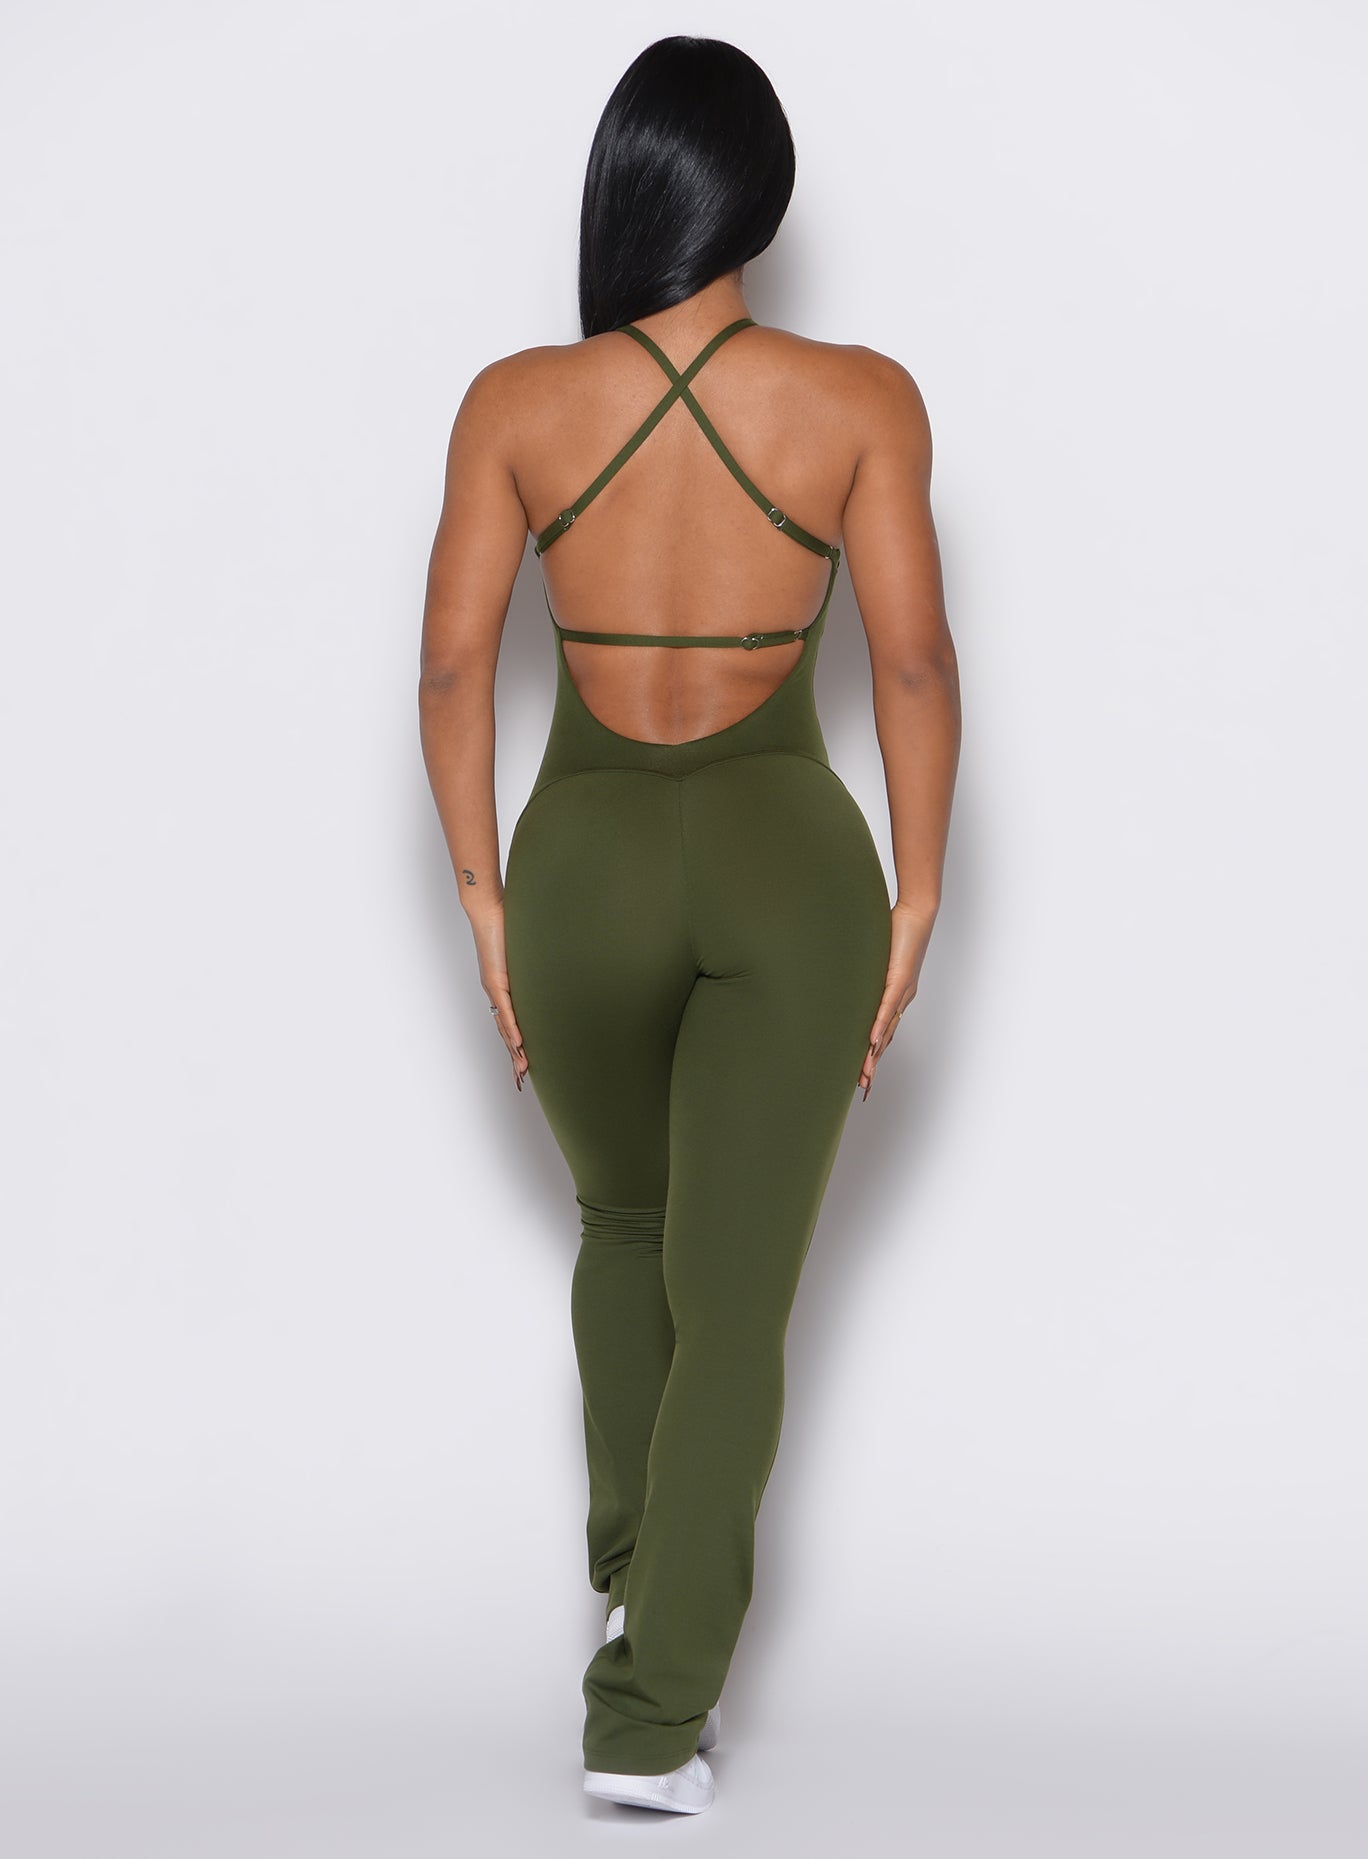 Back profile view of a model wearing the Bombshell Bunny Bodysuit in Jungle color